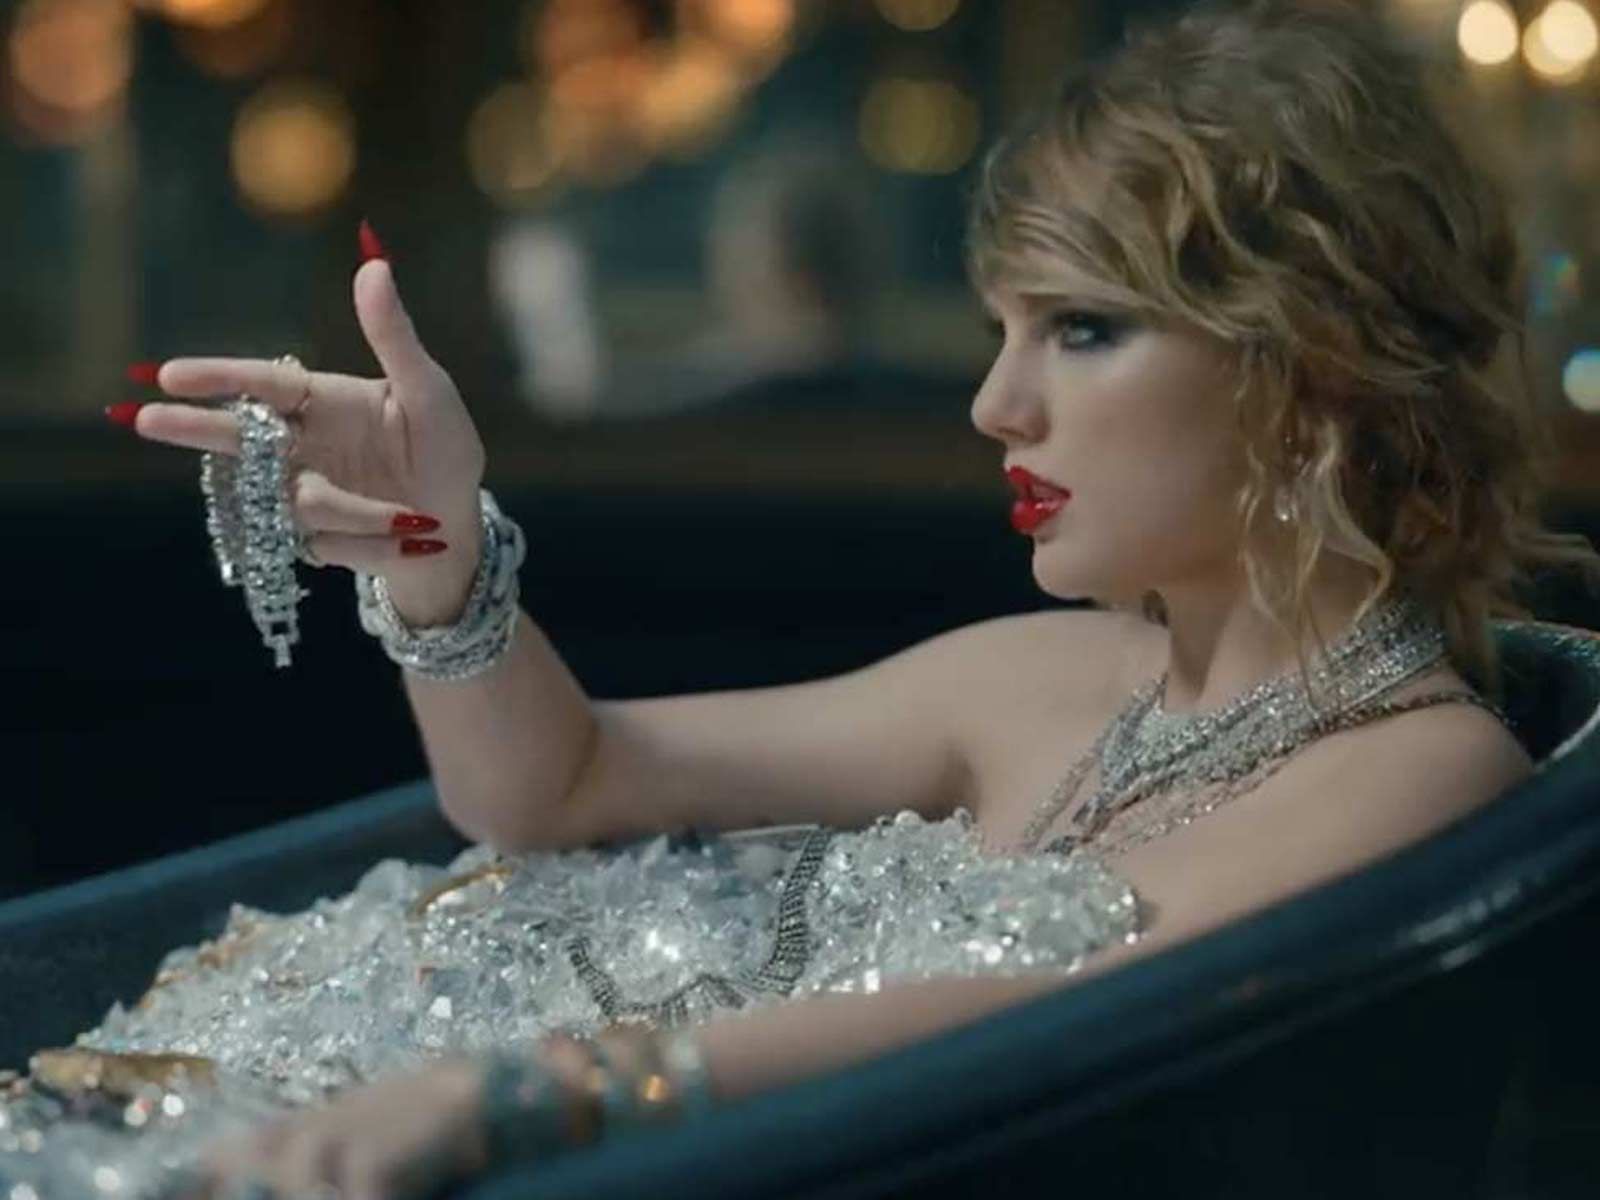 Taylor Swift Shades Kim K And Kanye In New Music Video